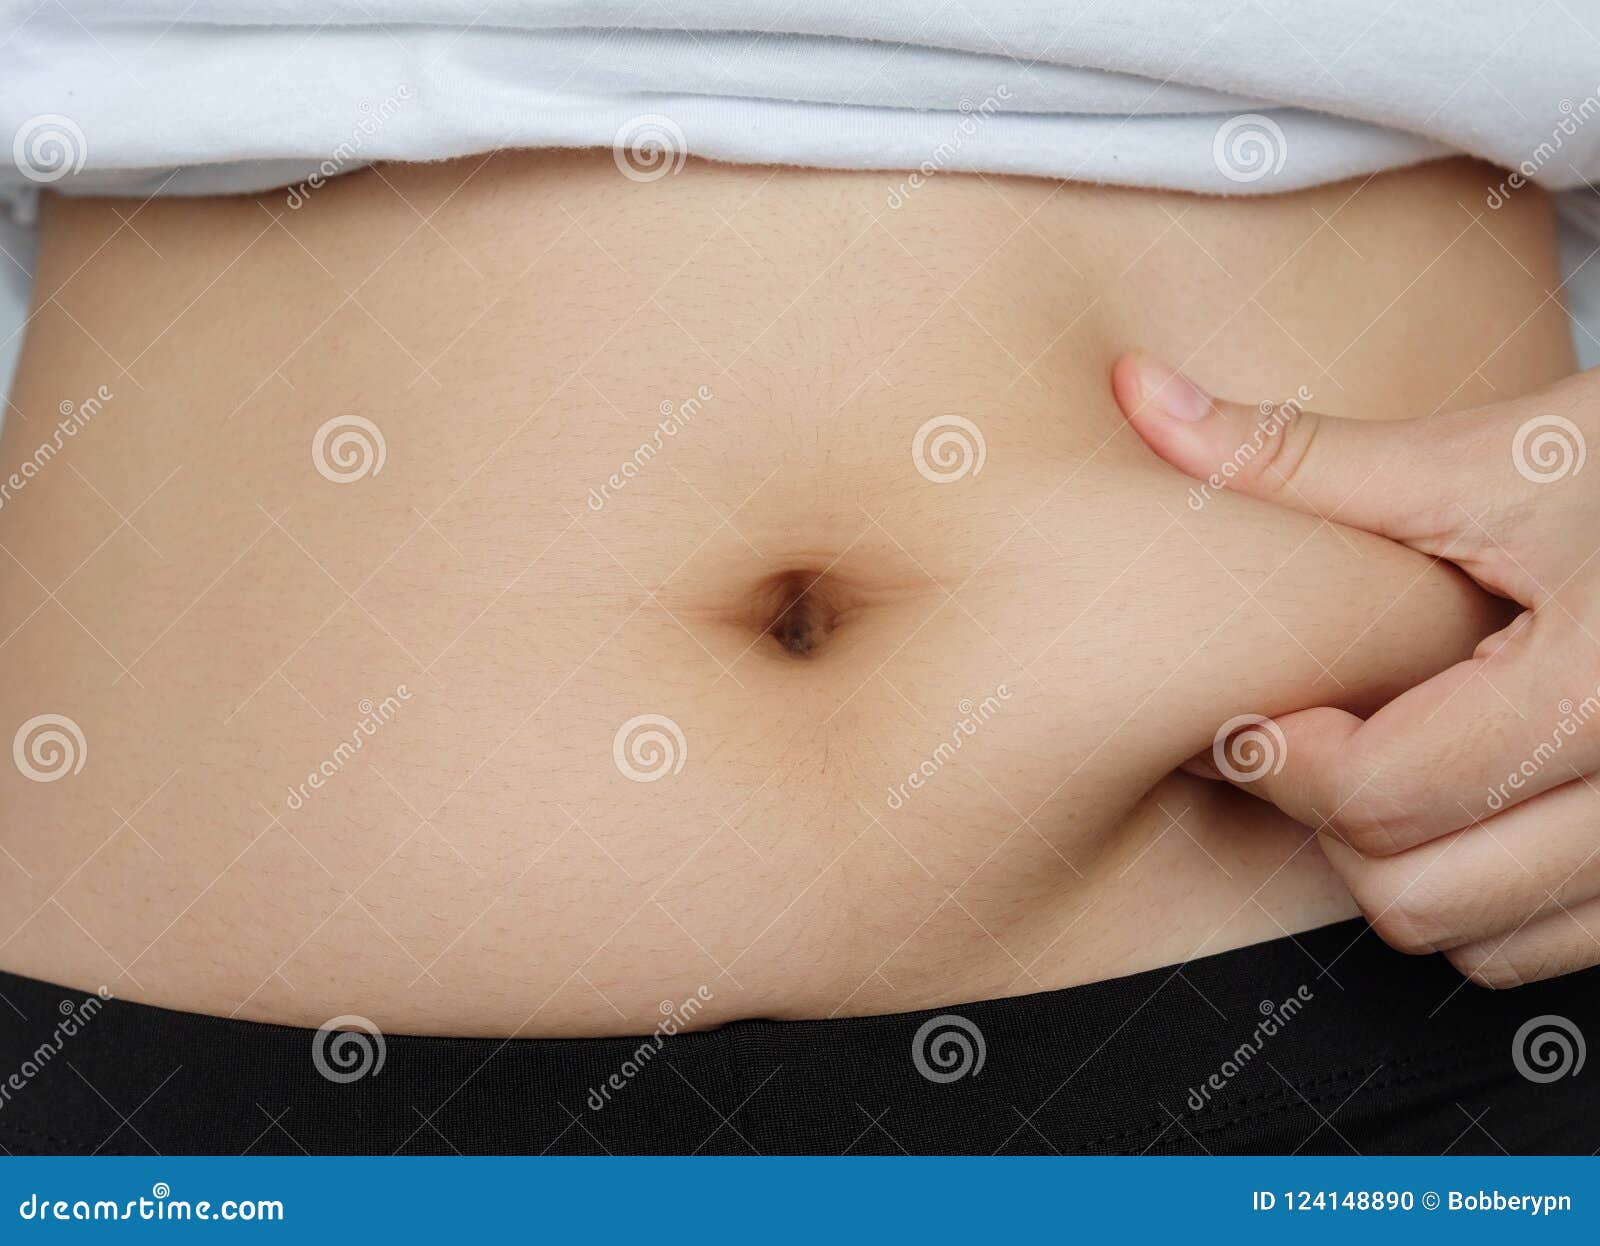 side of woman hand catching fat body belly paunch , diabetic risk factor .